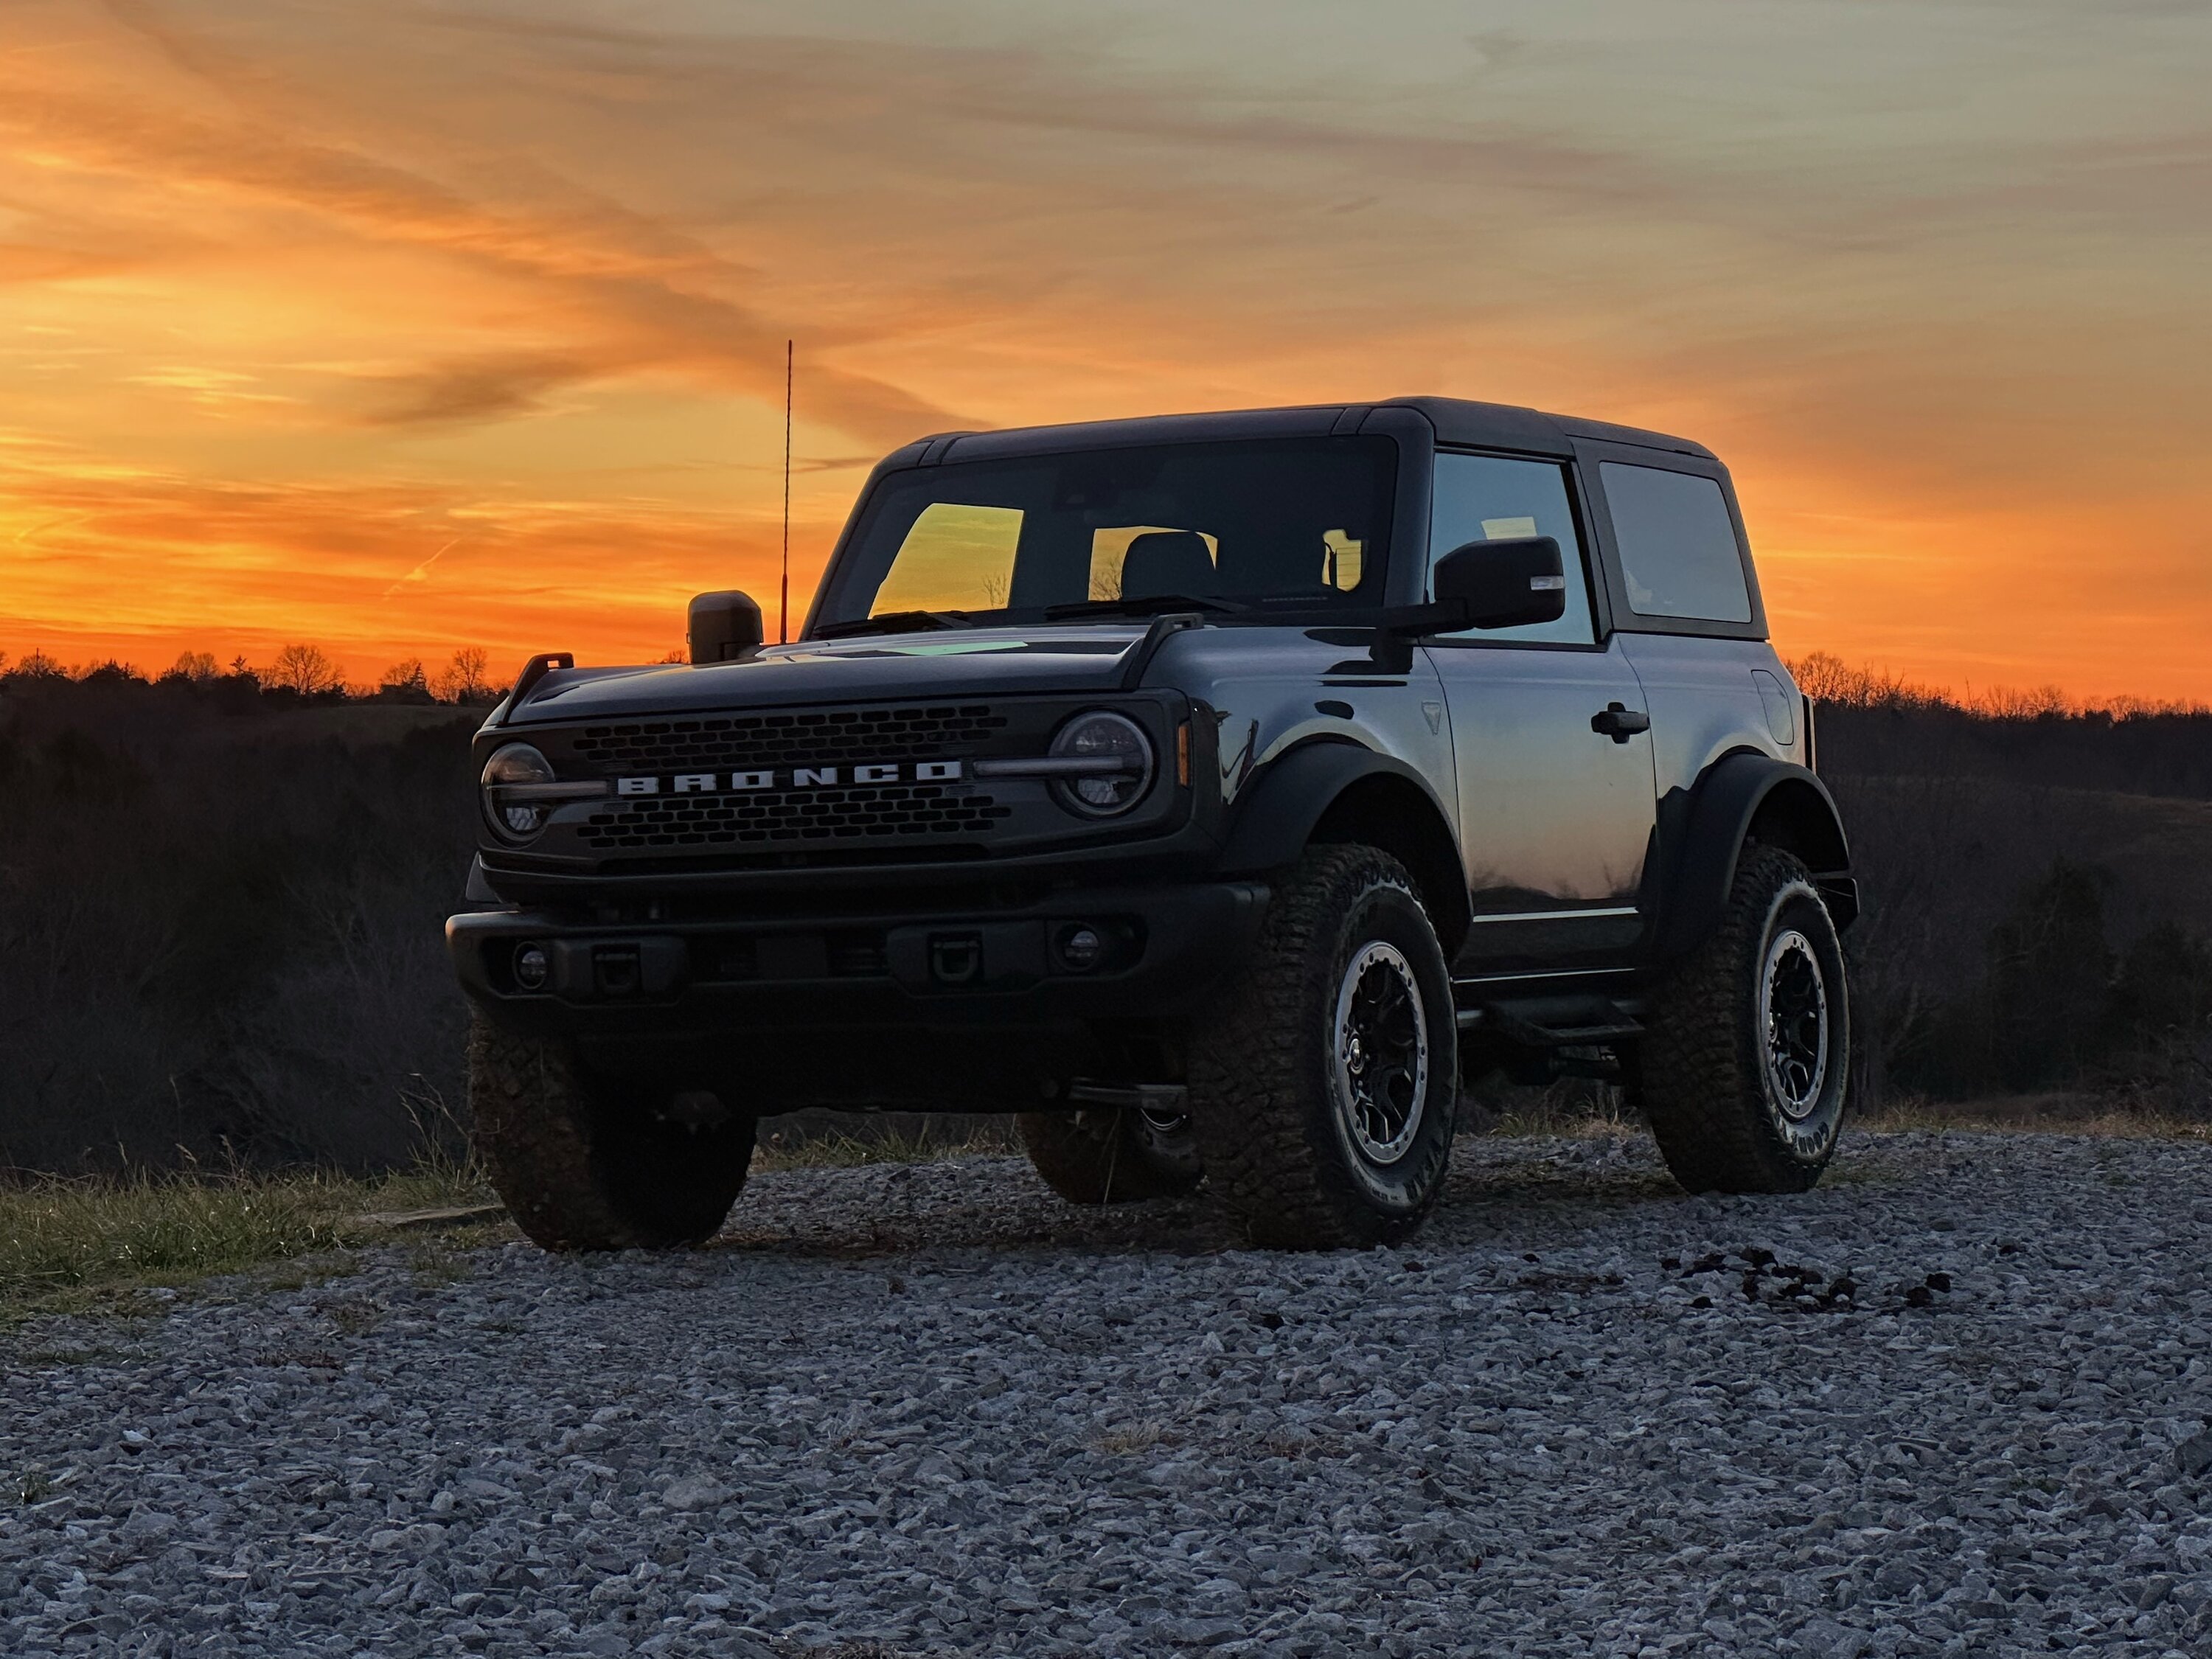 Ford Bronco -ANYONE KNOW HOW MANY 2 DOOR BRONCOS ARE PRODUCED YEARLY? - Bronco Sunset